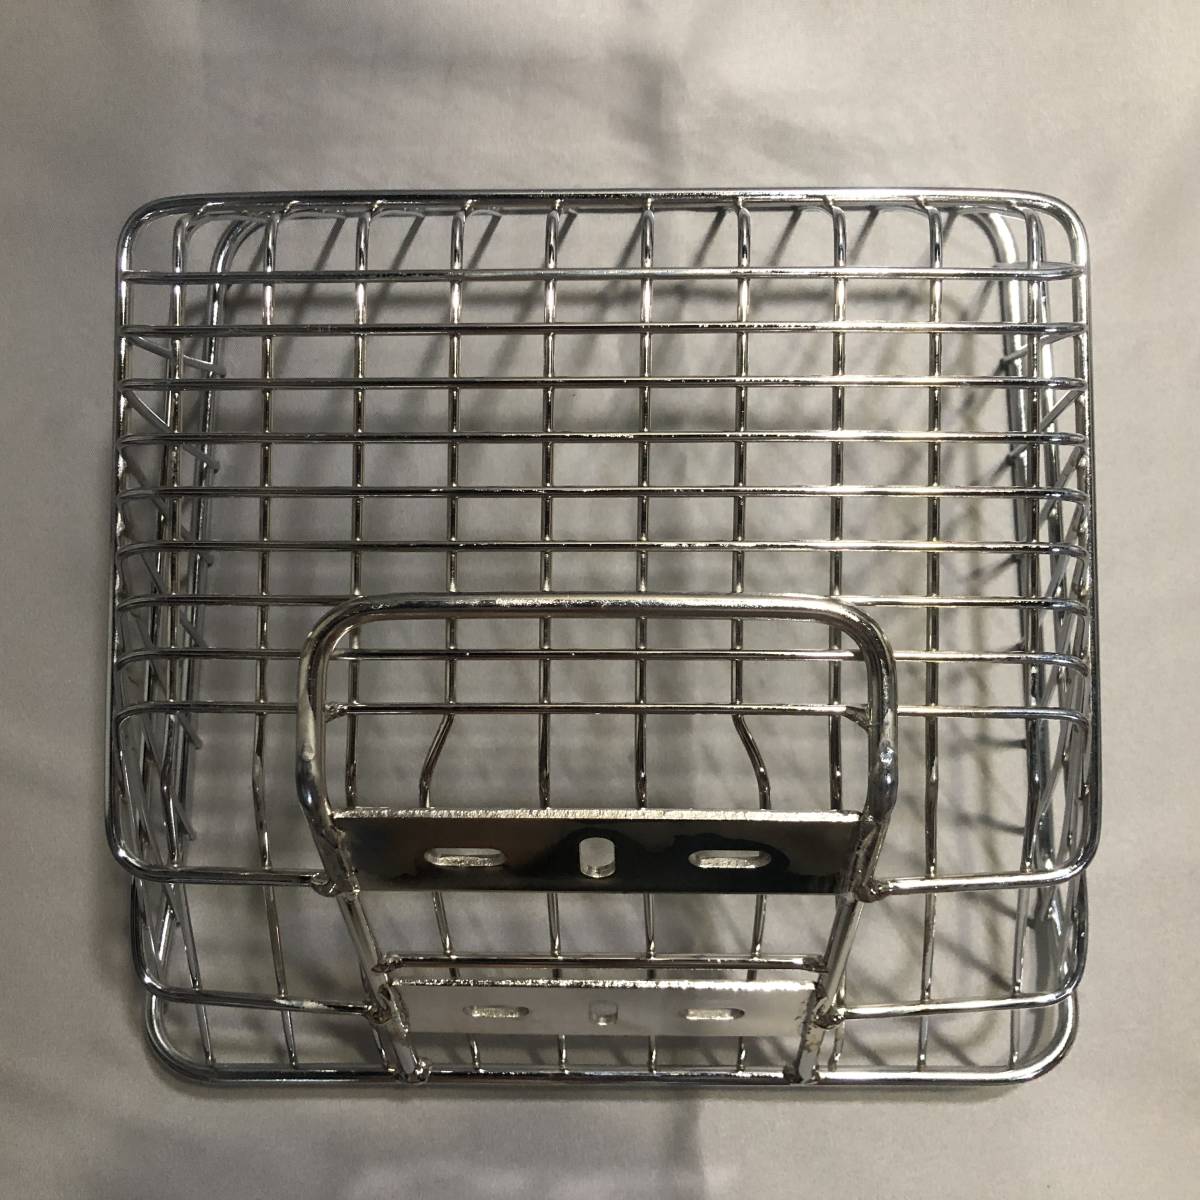  new goods * prompt decision * Thai made * for motorcycle all-purpose. front basket * front basket * silver 